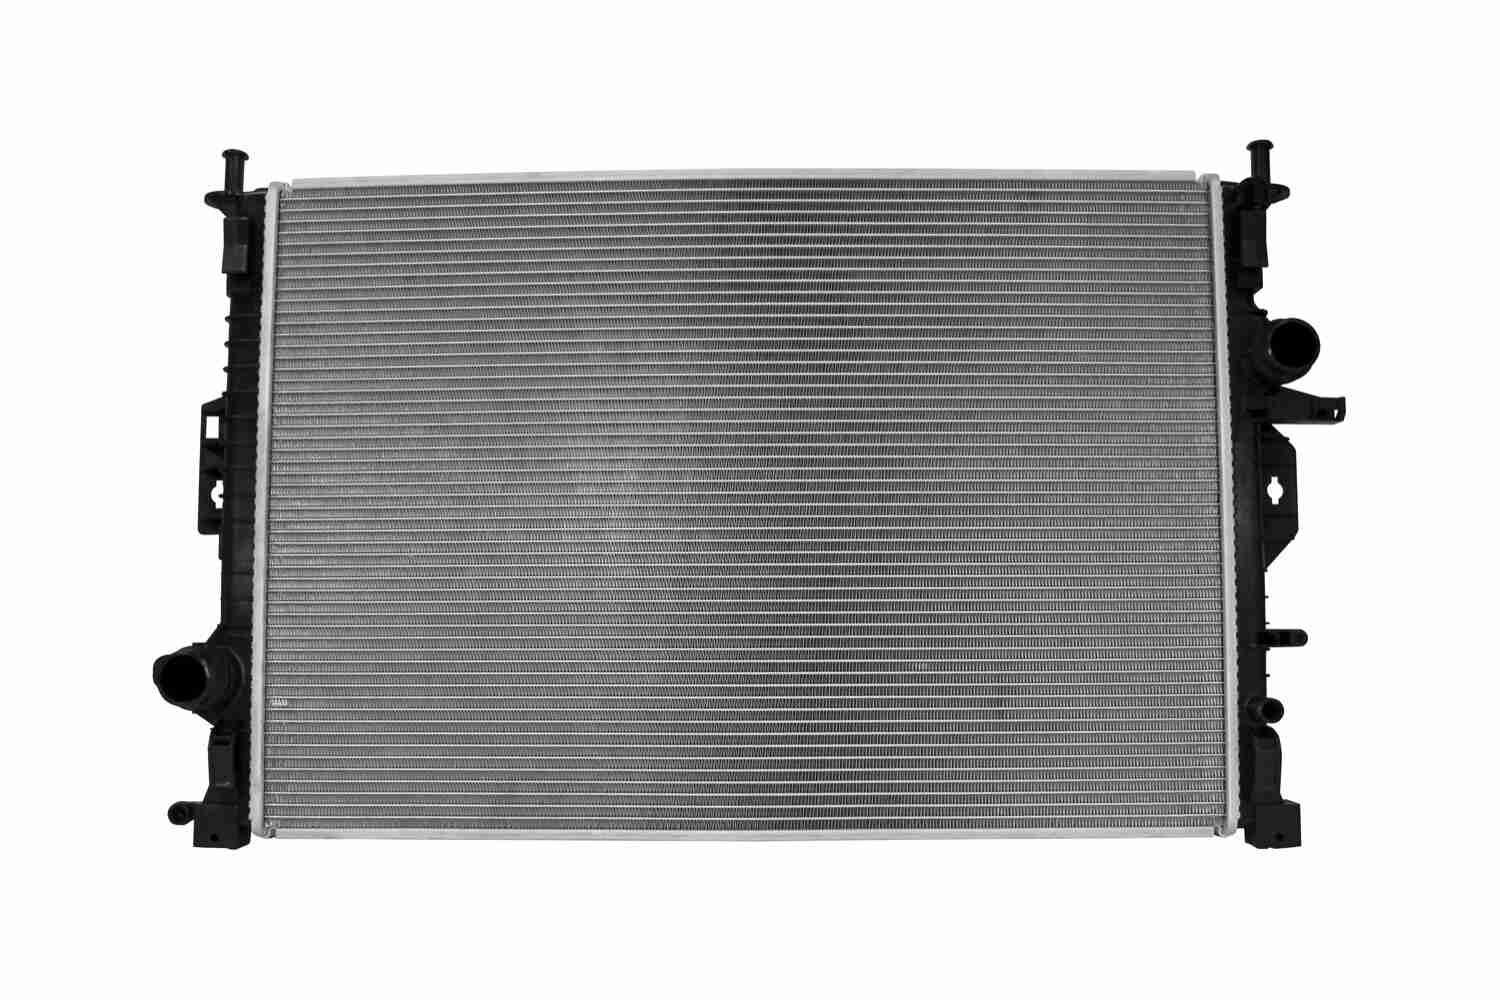 VEMO V25-60-0023 Engine radiator for vehicles with/without air conditioning, 670 x 450 x 26 mm, Original VEMO Quality, Automatic Transmission